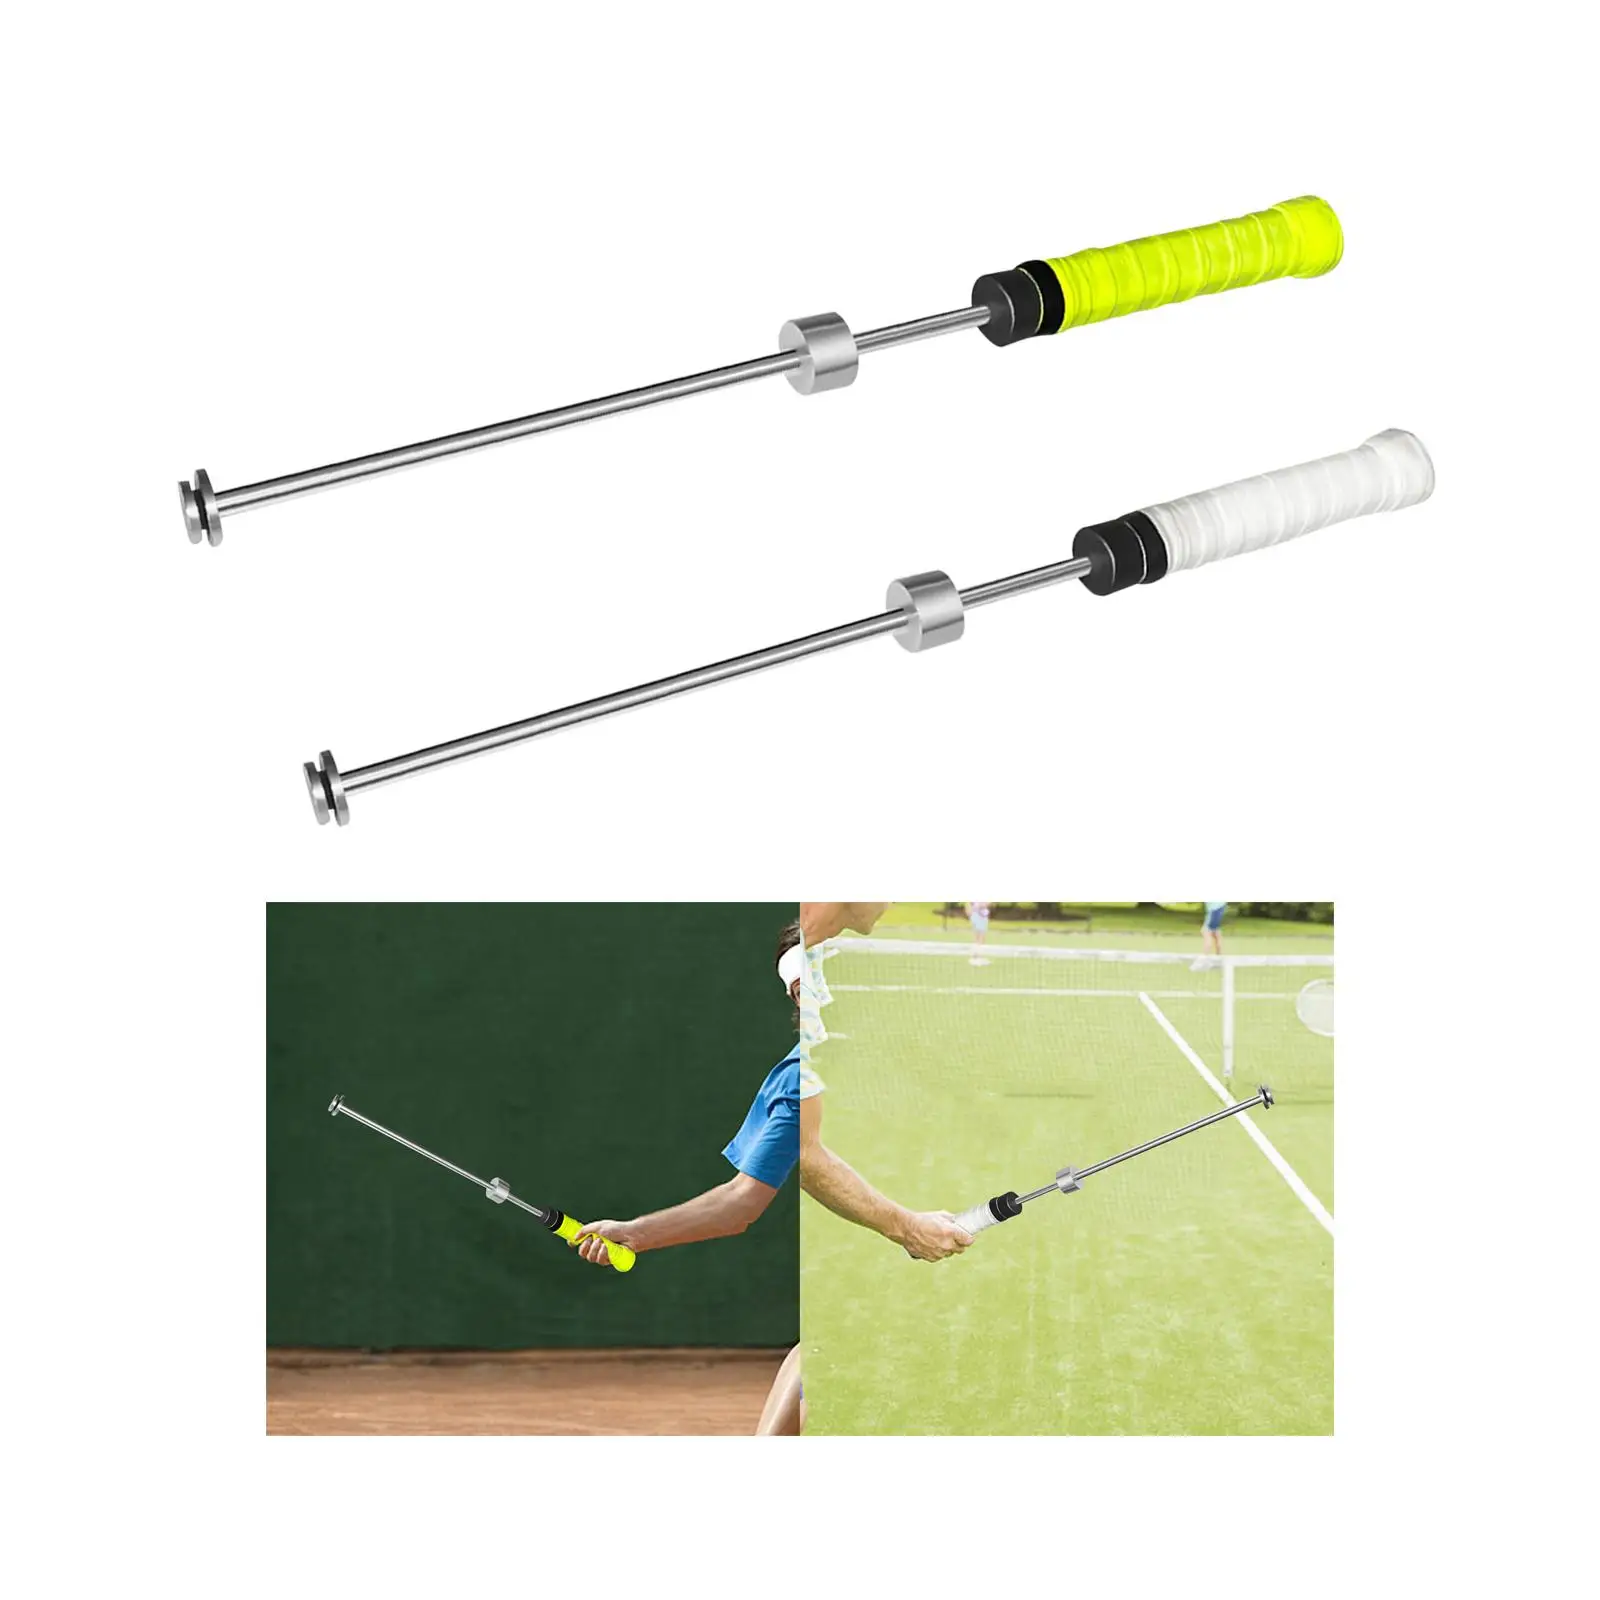 Tennis Swing Trainer Aid Beginner Correct Posture Indoor Outdoor Position Correction with Sound